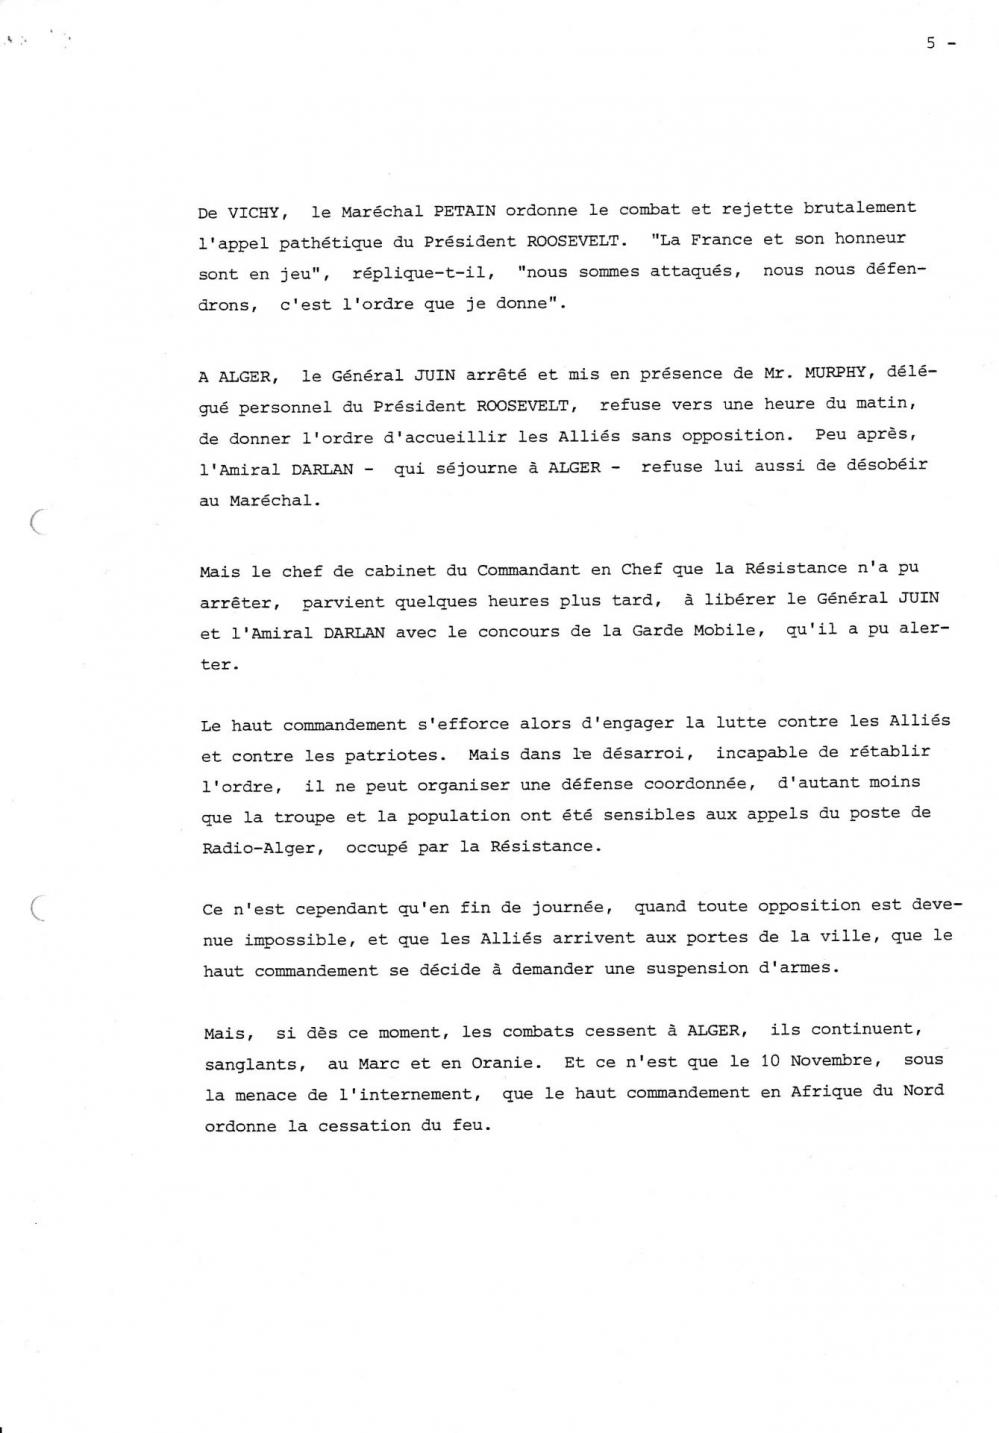 General jousse page 5jpg